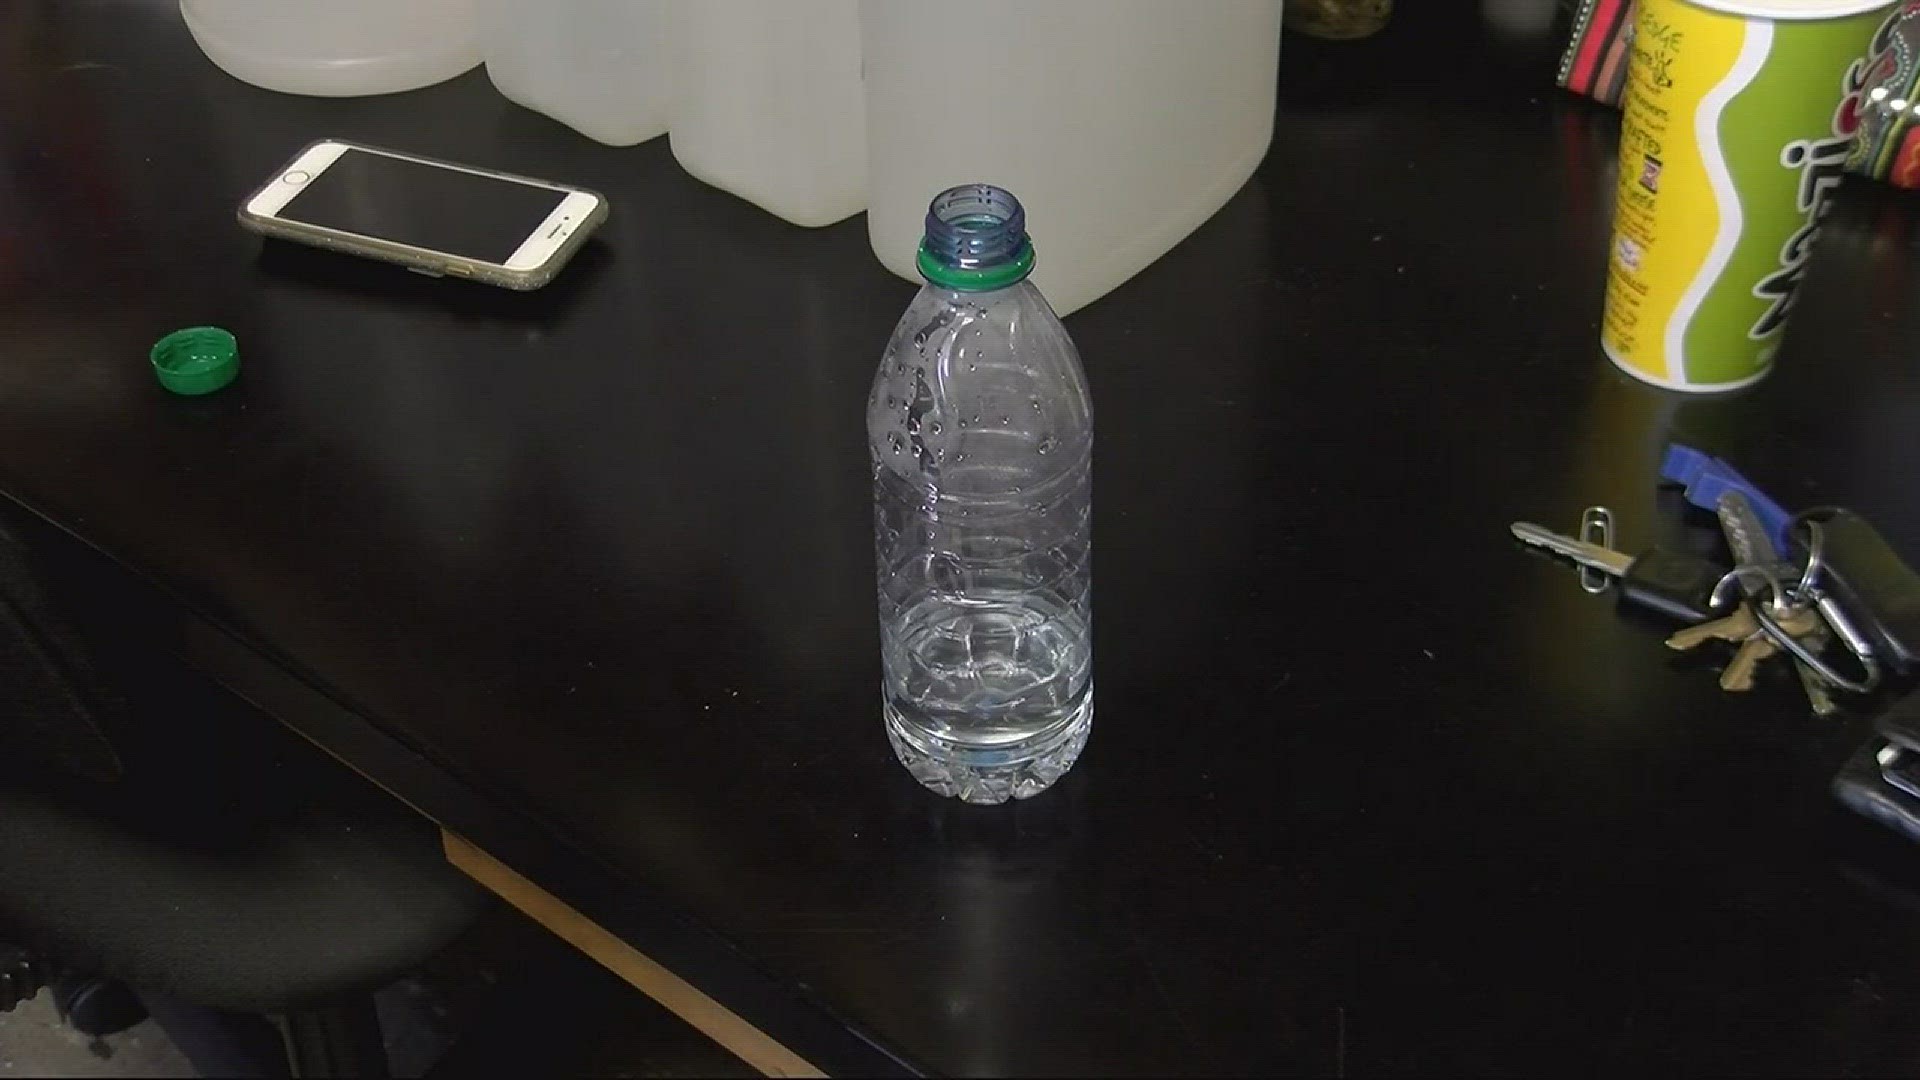 What happens to water bottles that are left in hot cars?